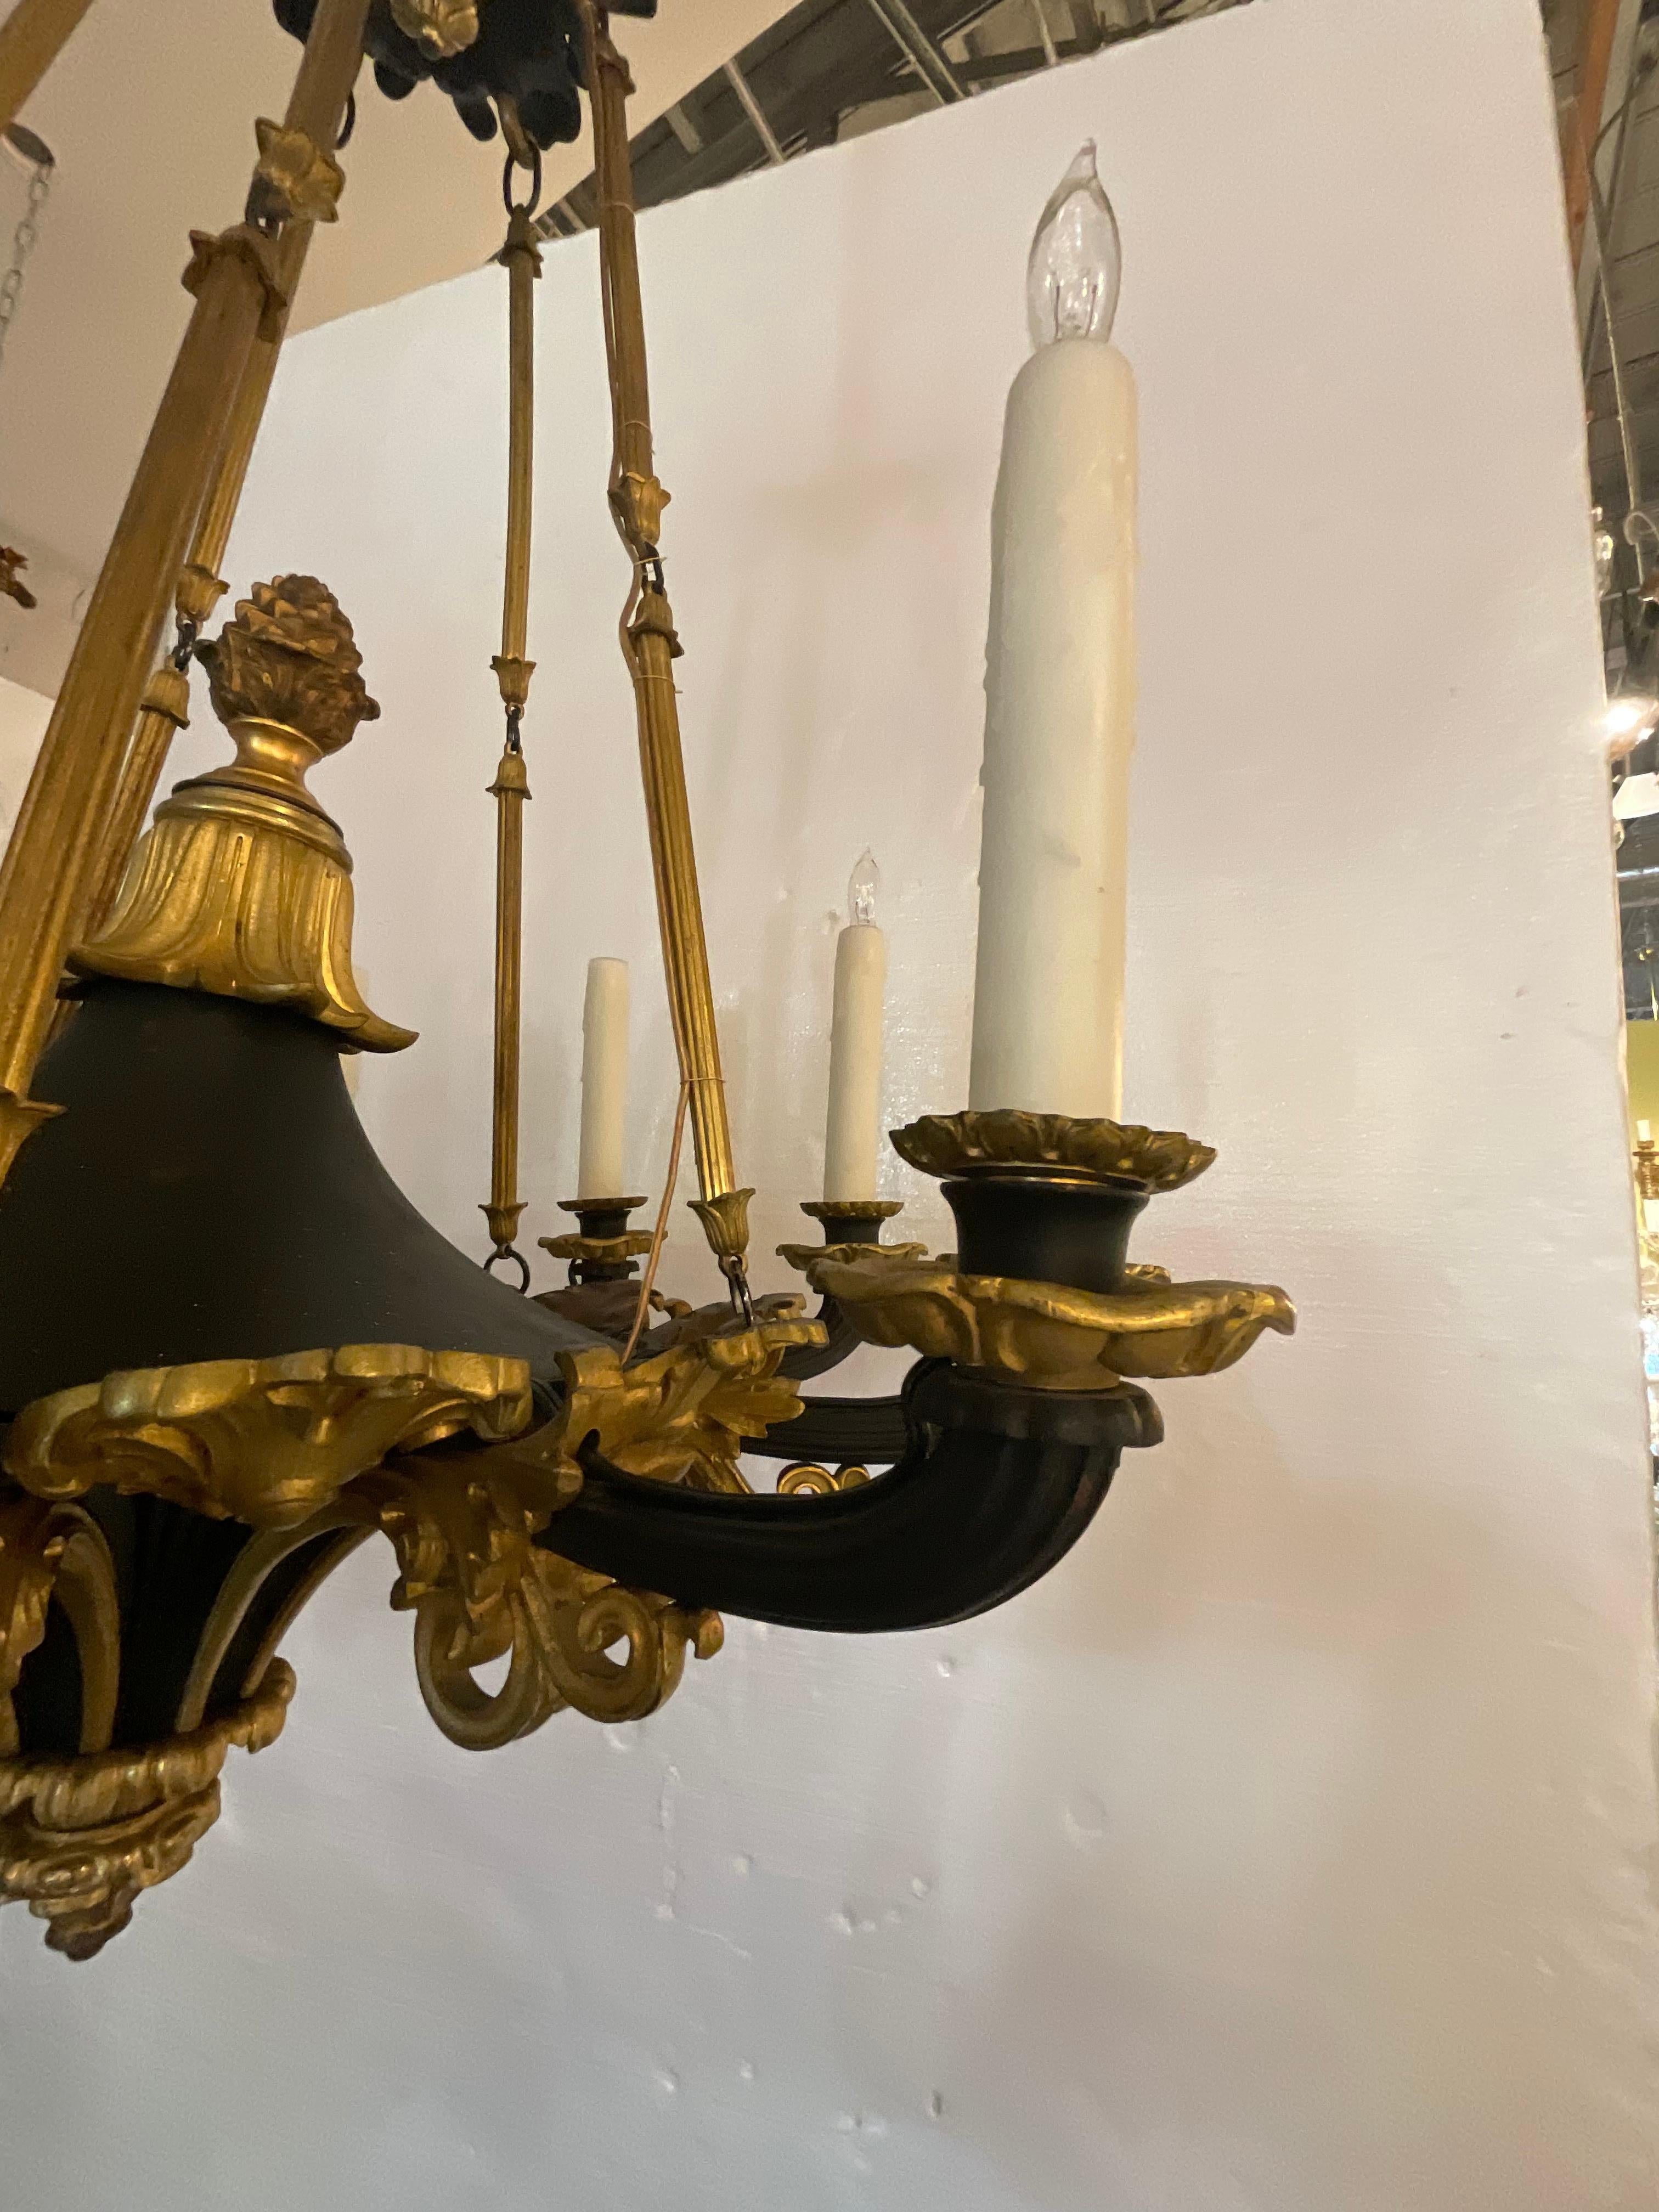 Empire Gilt Bronze Chandelier, Circa 1920’s 10 lights, with wax candle covers, US wired and certified.